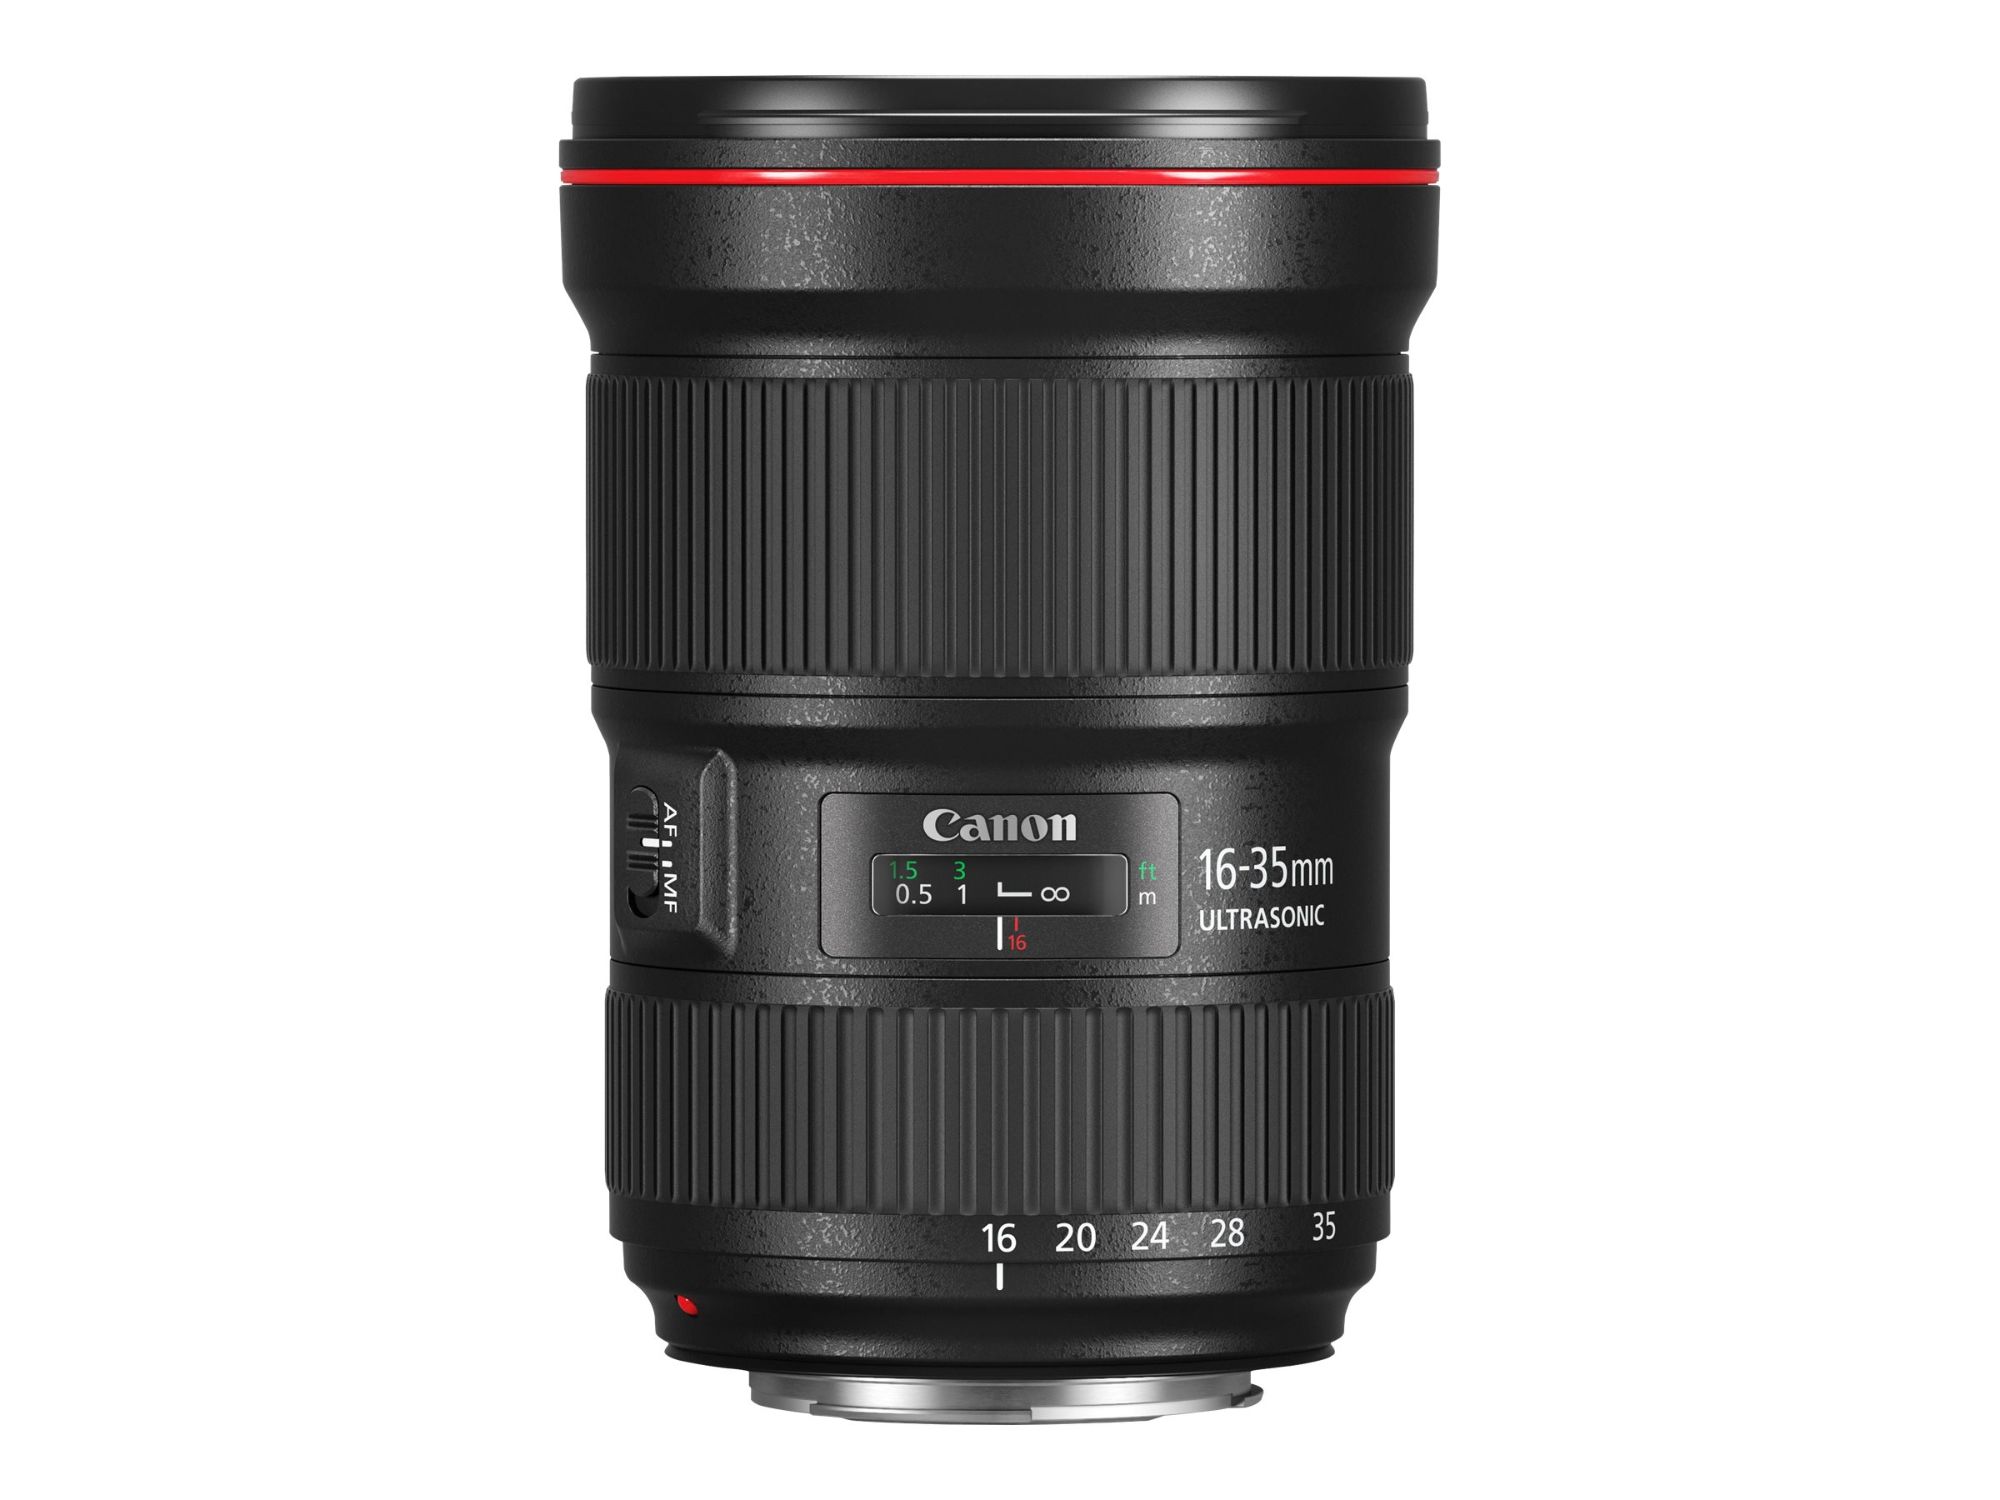 Objectif Canon EF - Fonction Zoom - 16 mm - 35 mm - f/2.8 L III USM - Canon EF d'occasion  